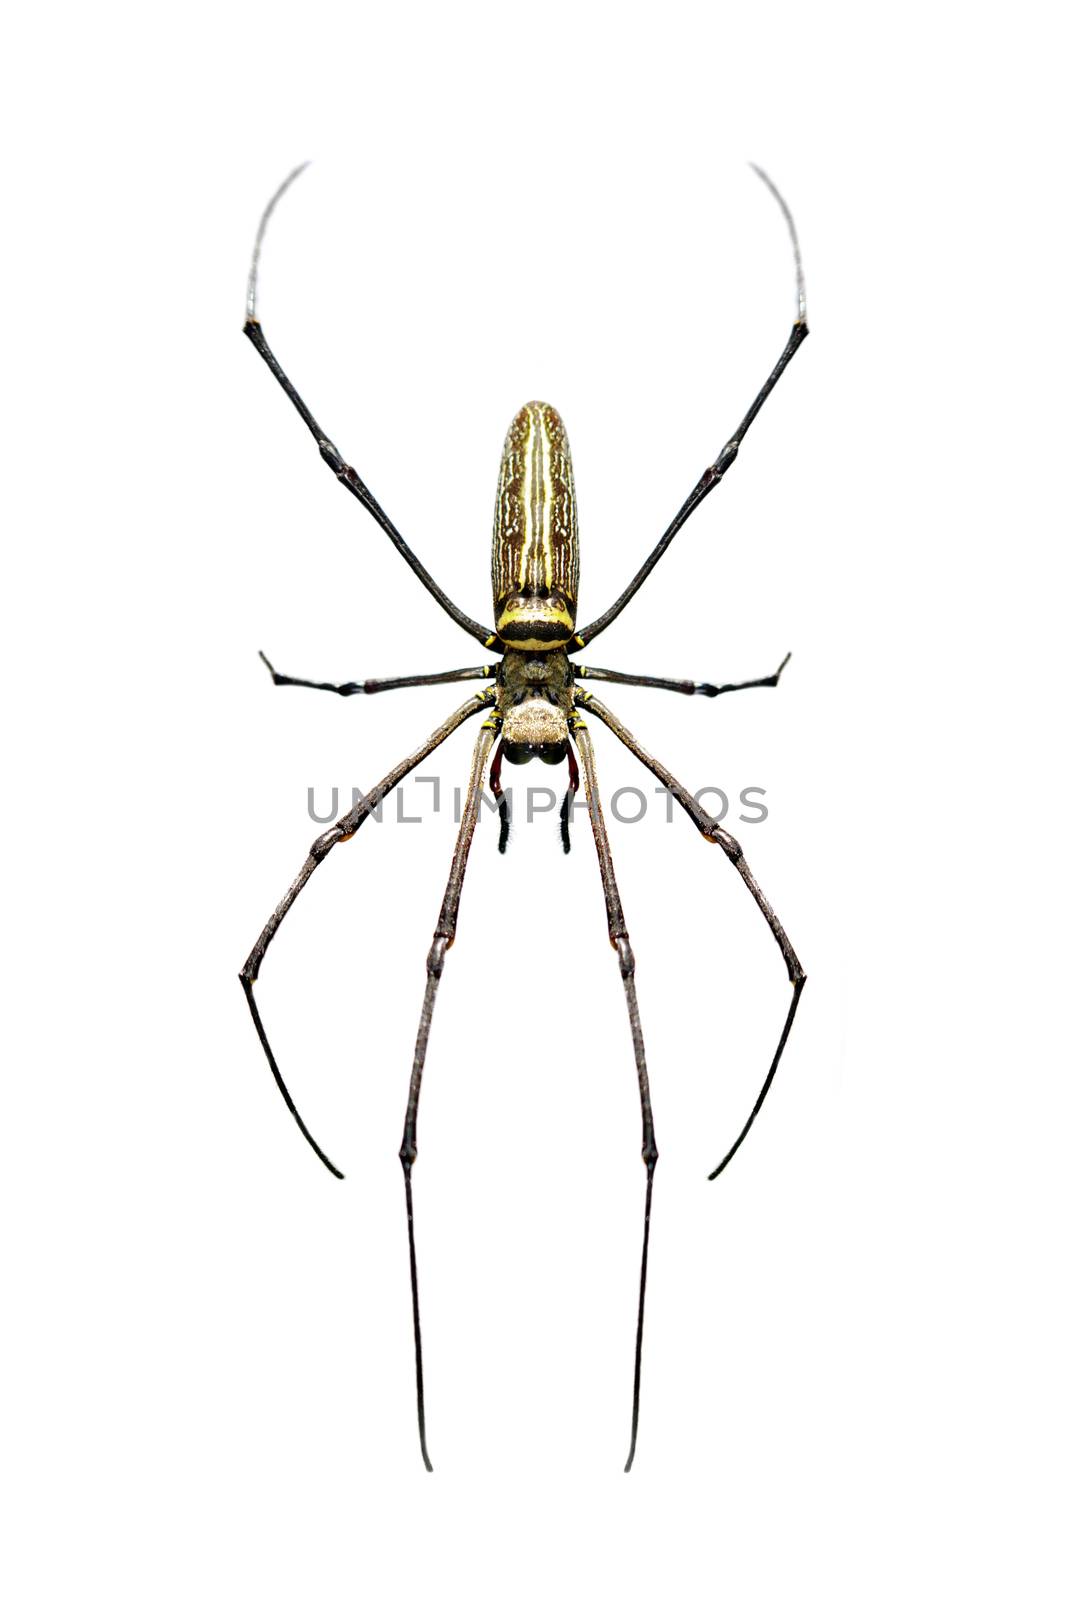 Image of Golden Long-jawed Orb-weaver Spider(Nephila pilipes) is by yod67